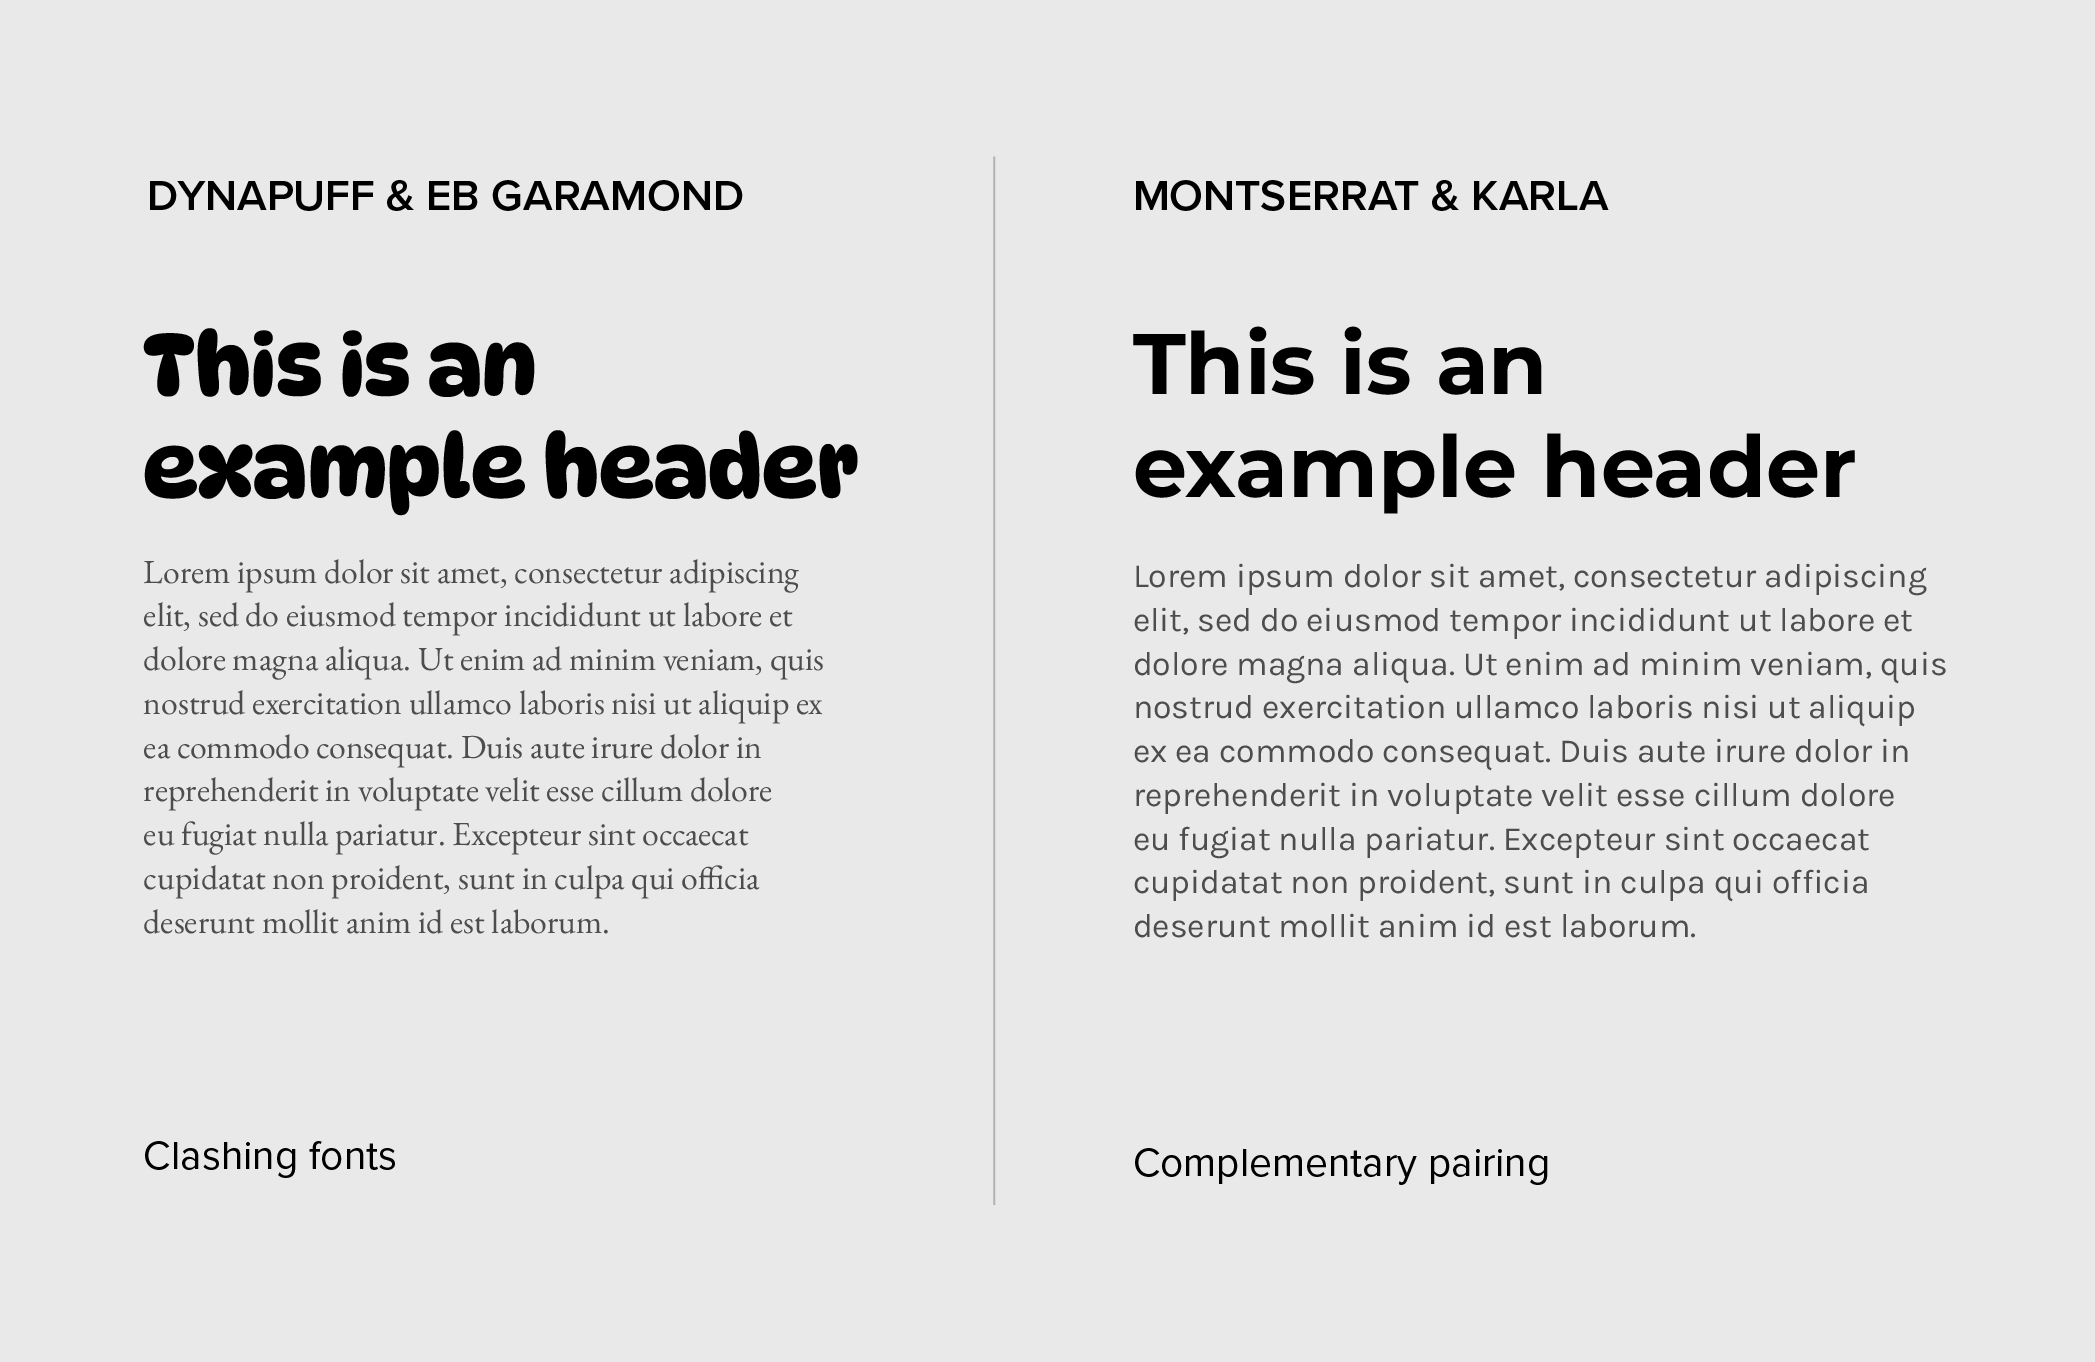 Comparison between clashing fonts and complementary fonts